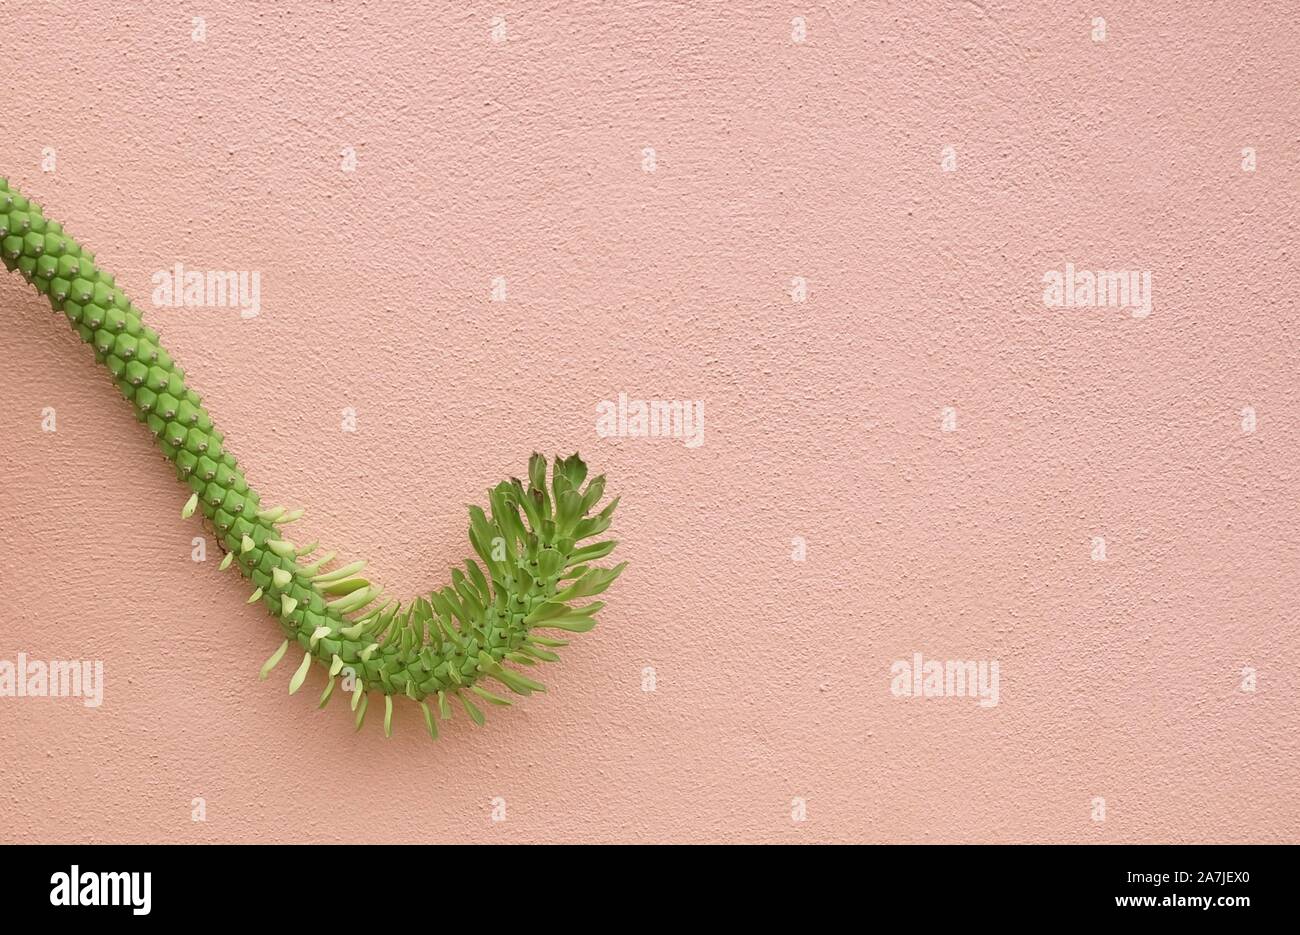 Beautiful Ornamental Hemp or Rat Tail Cactus Hanging on The Wall for Home and Building Decoration. Stock Photo